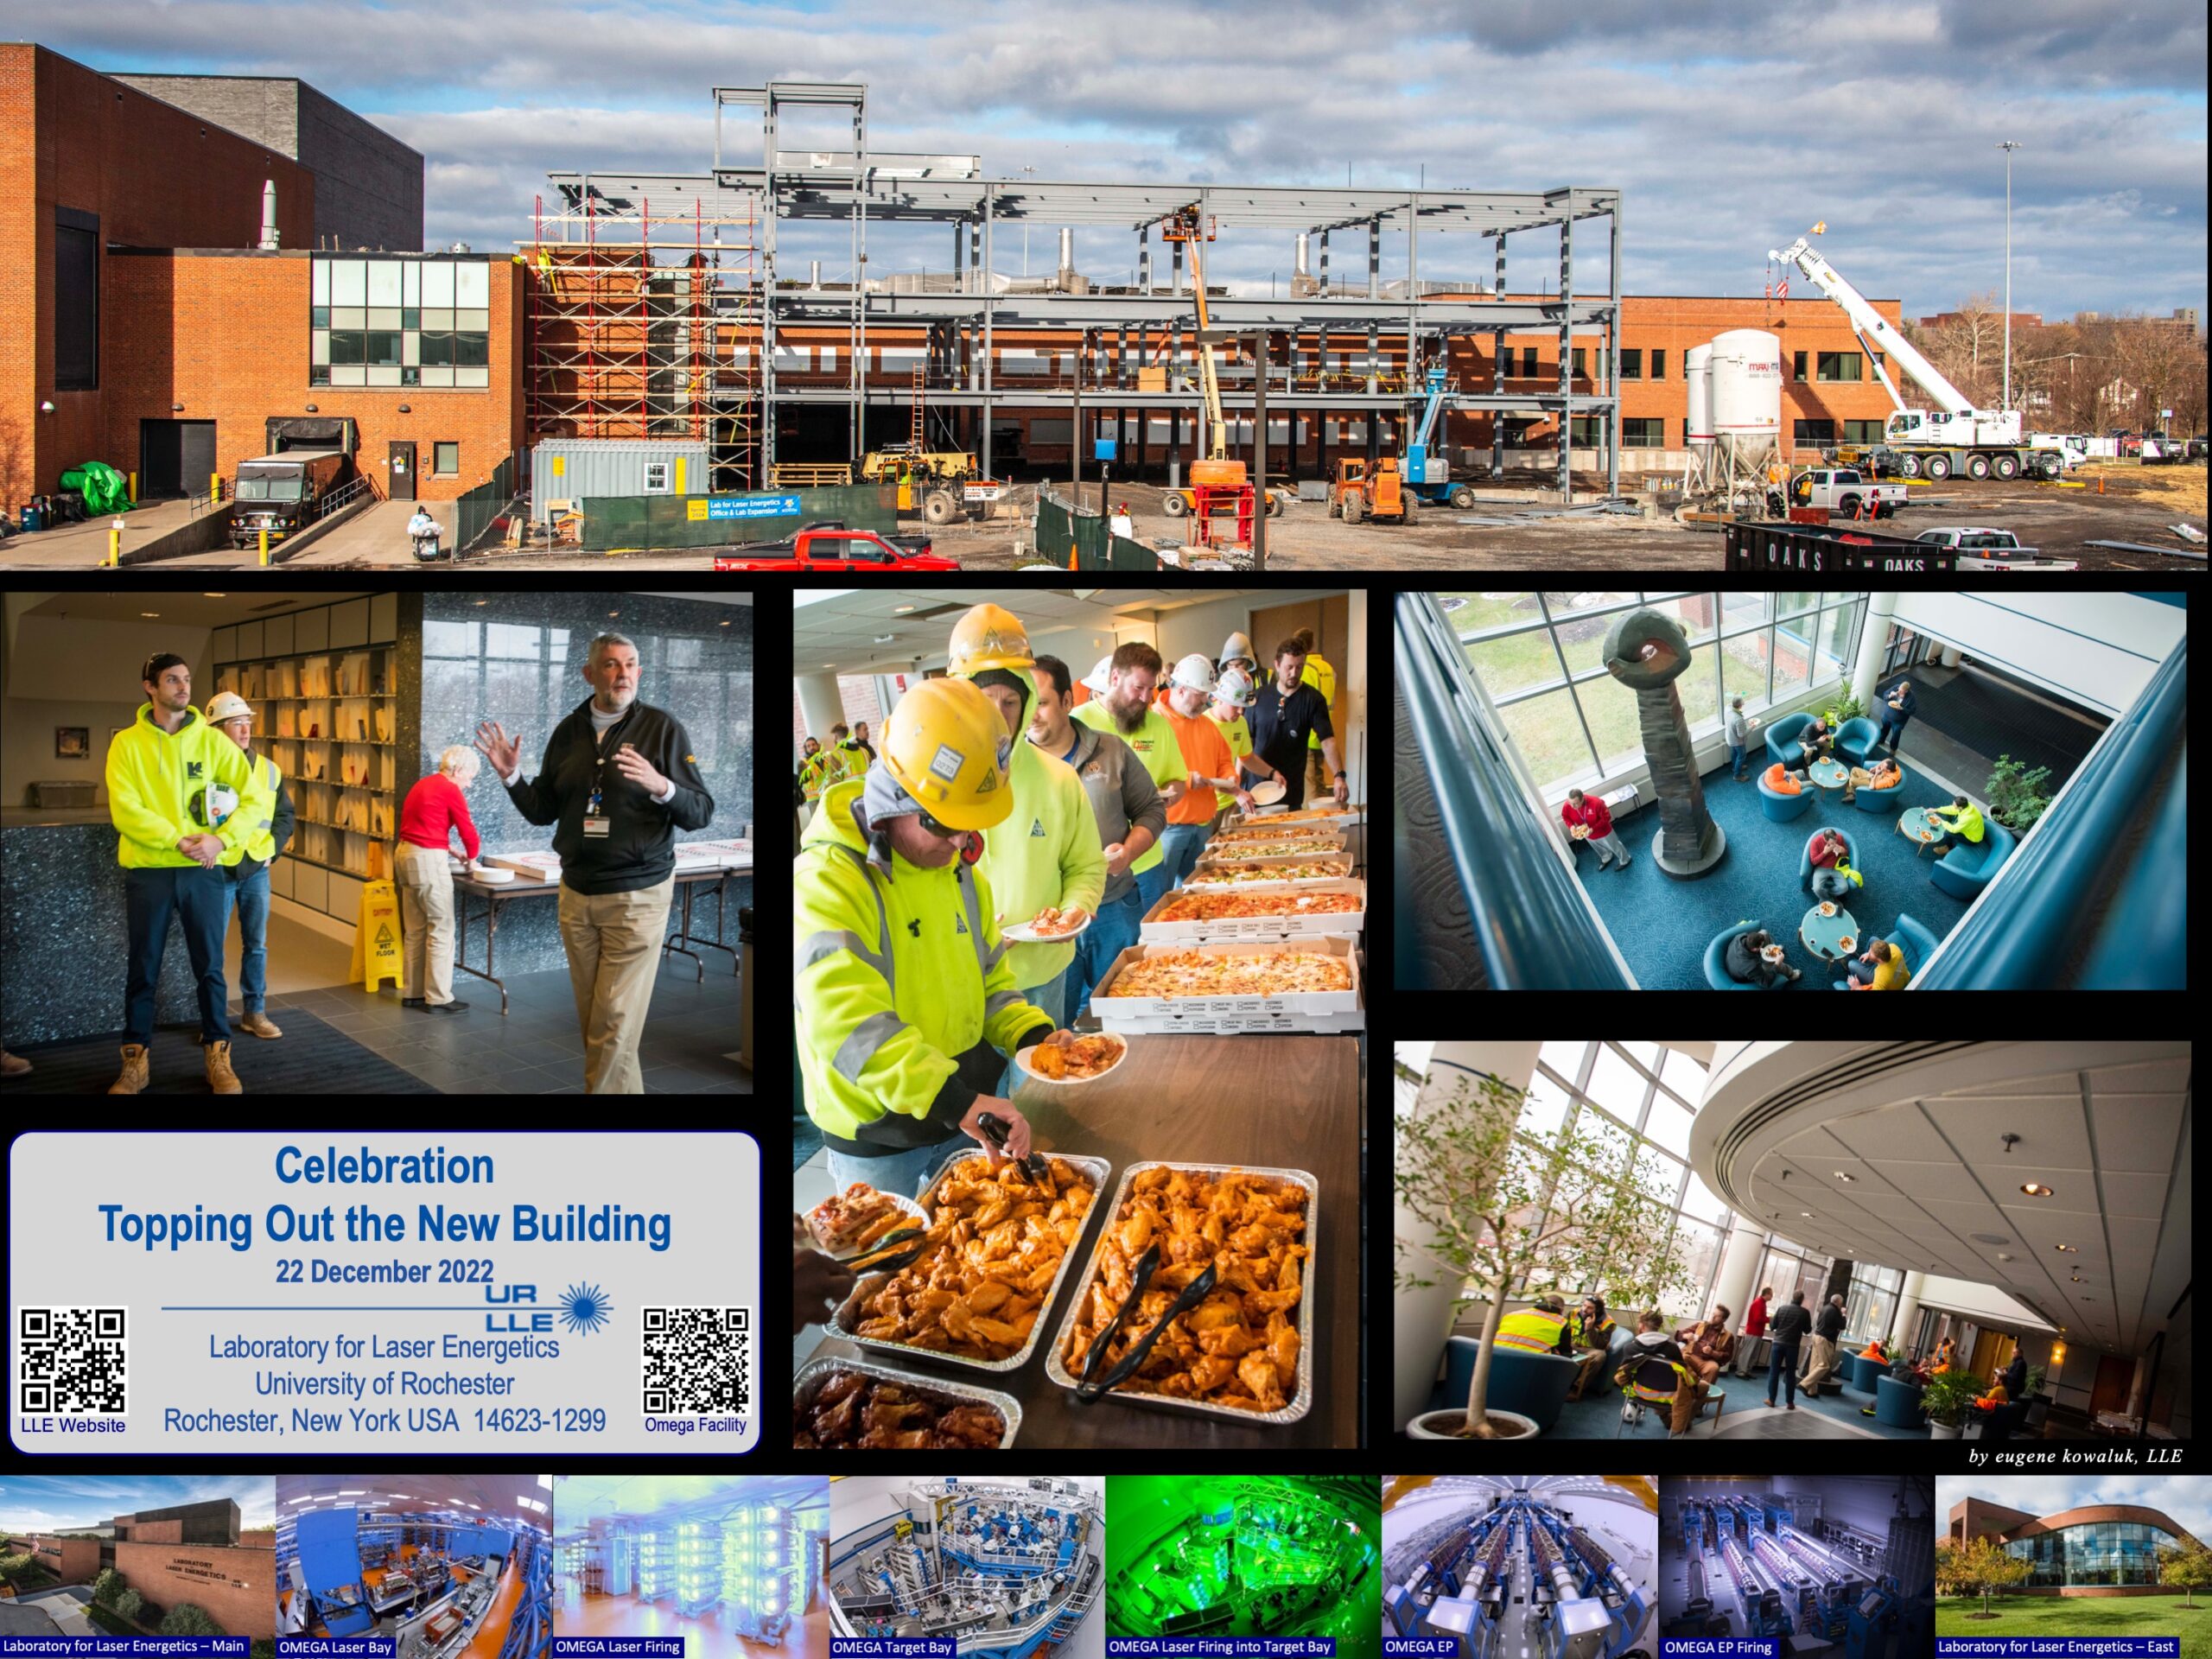 Collage of images from laser lab addition topping out celebration